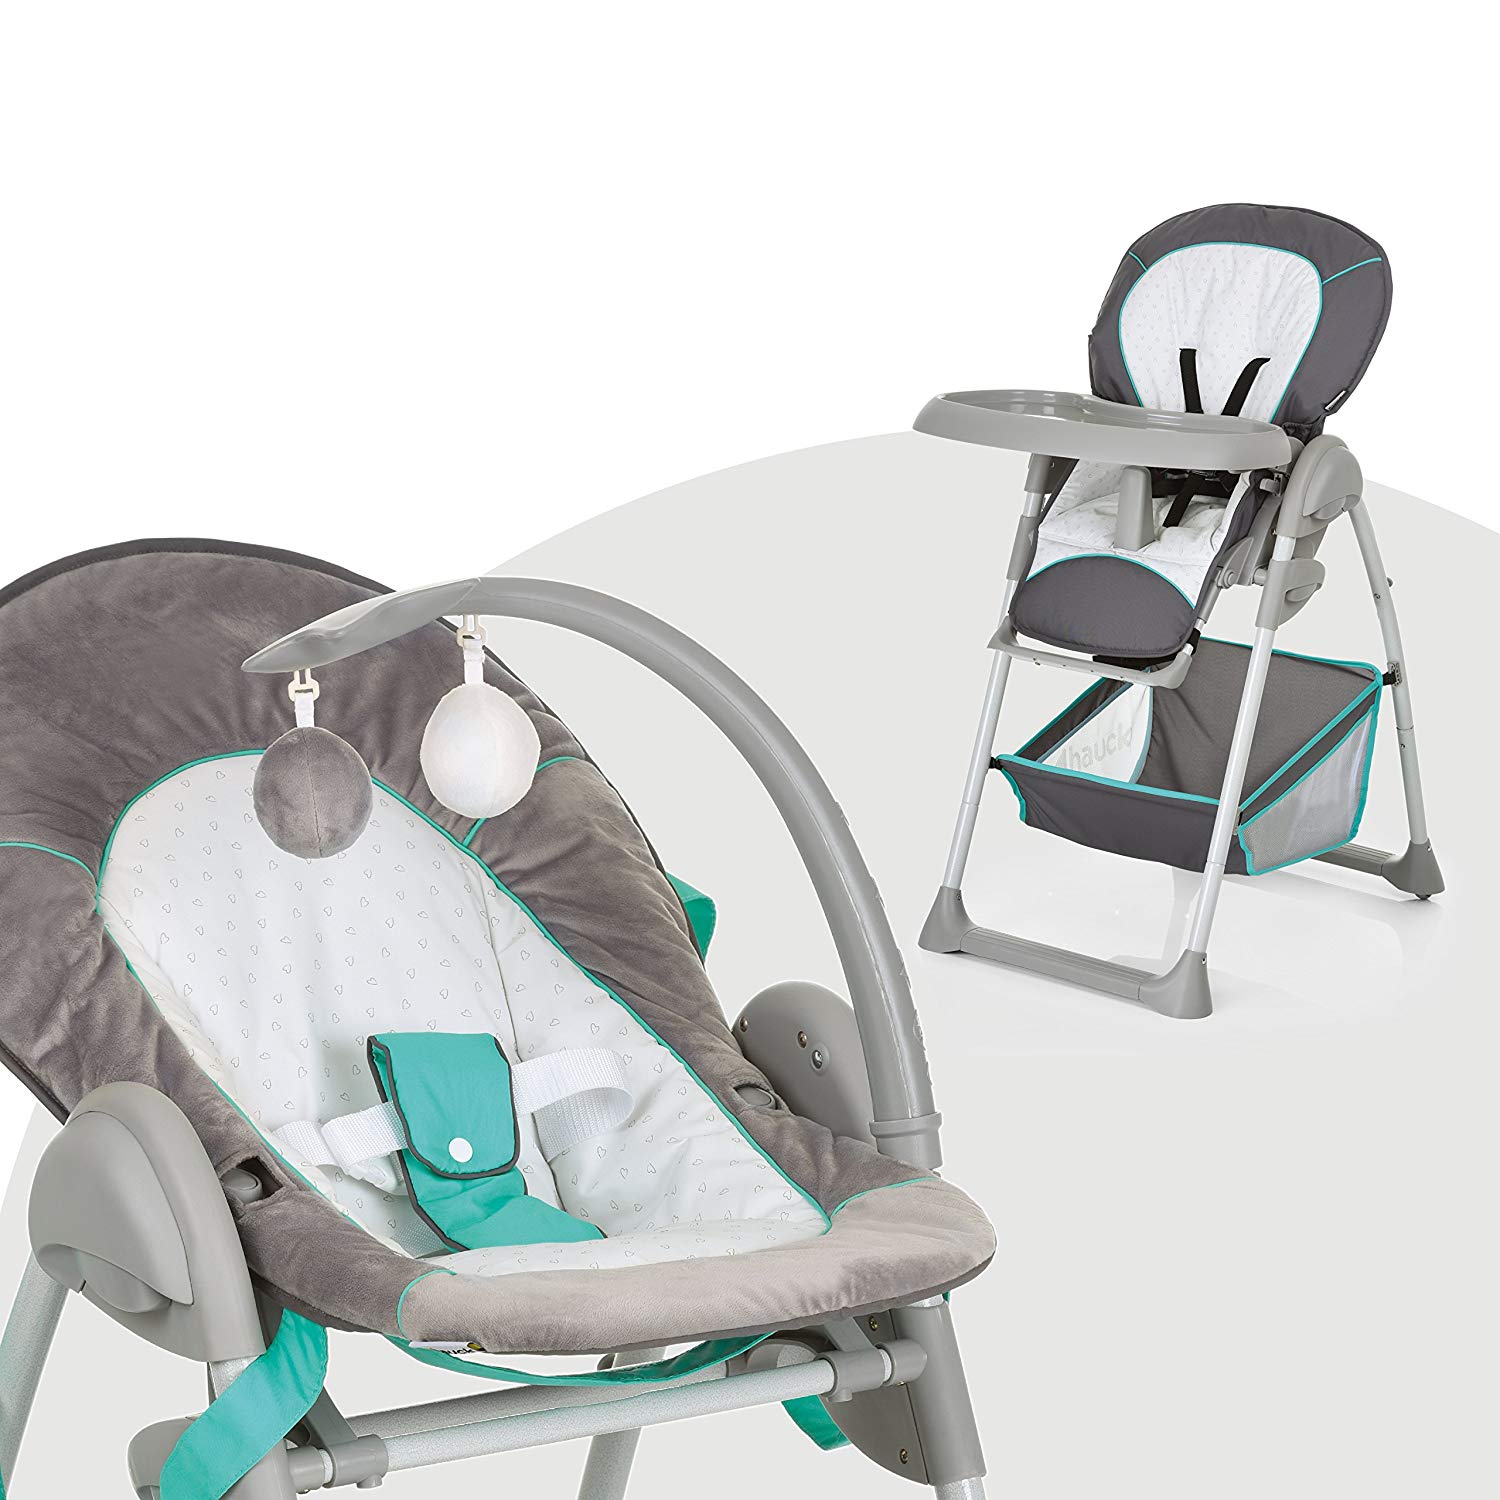 Hauck Sit N Relax 665091 Hearts High Chair From Birth Baby Lounger/Recline